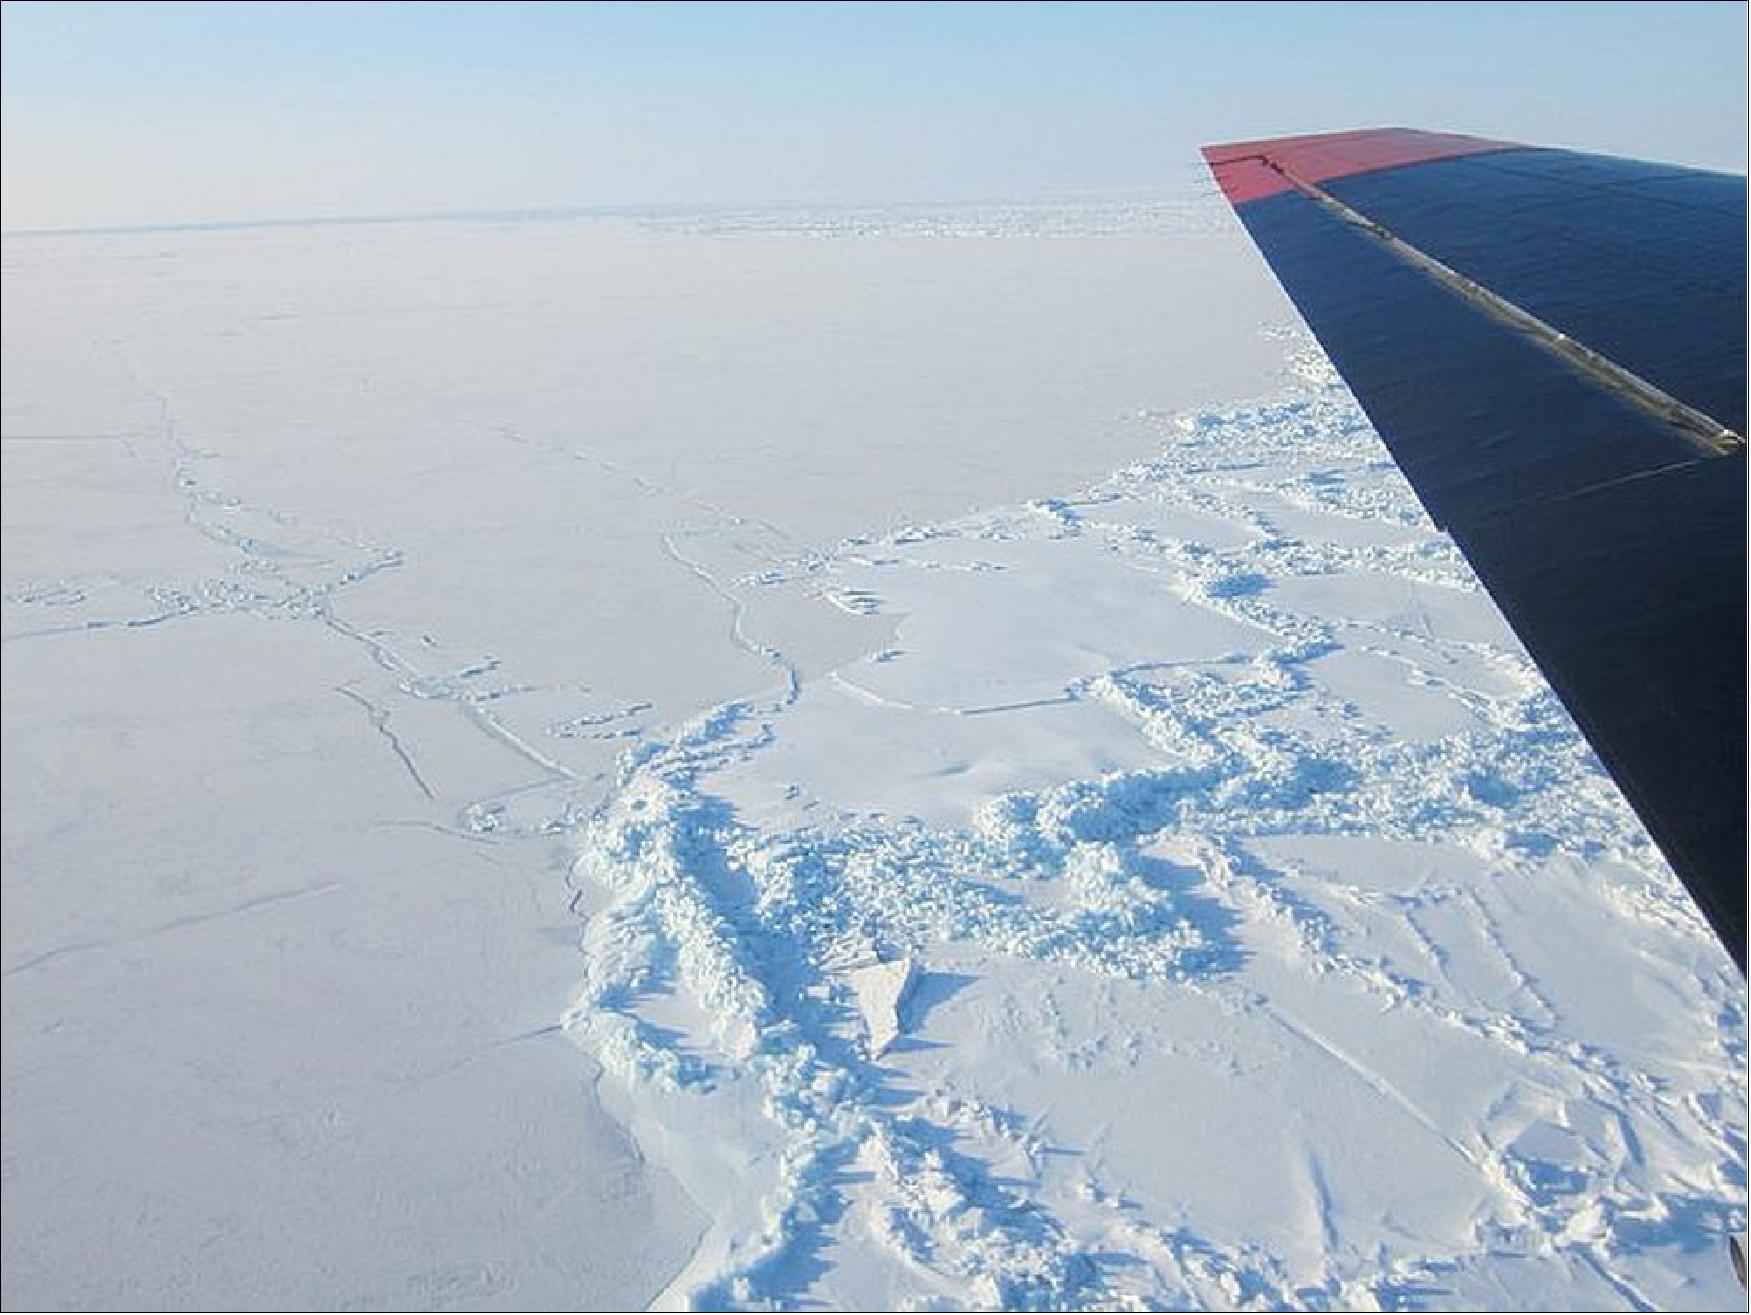 Figure 70: Flying over the boundary between young sea ice (left) and older ice (right) during the 2014 Arctic campaign to validate data from ESA’s CryoSat-2 mission (image credit: A. Casey, University of Alberta, released on March 18, 2015)